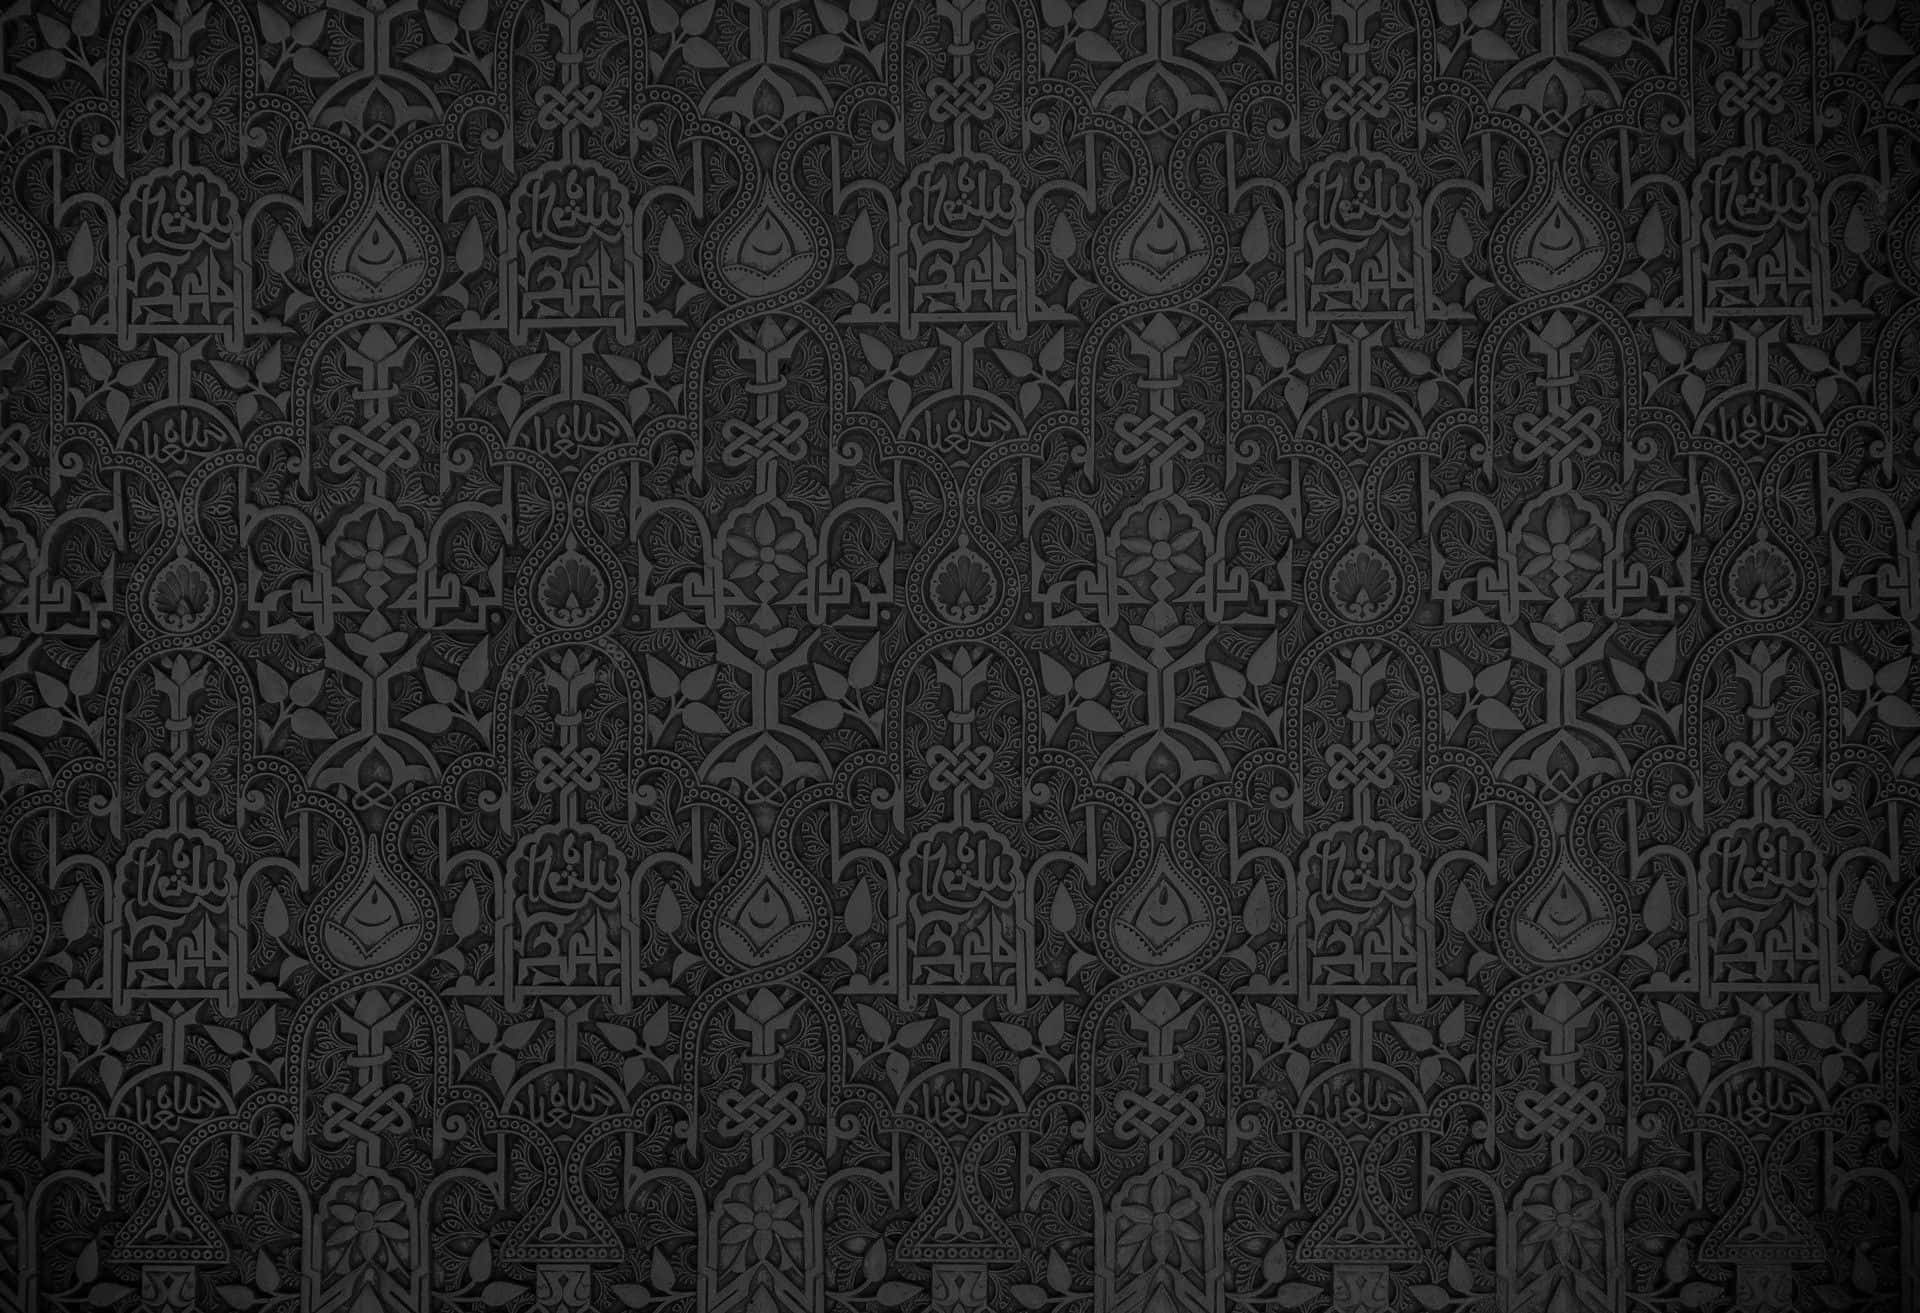 An exquisite design inspired by the Arabic culture Wallpaper